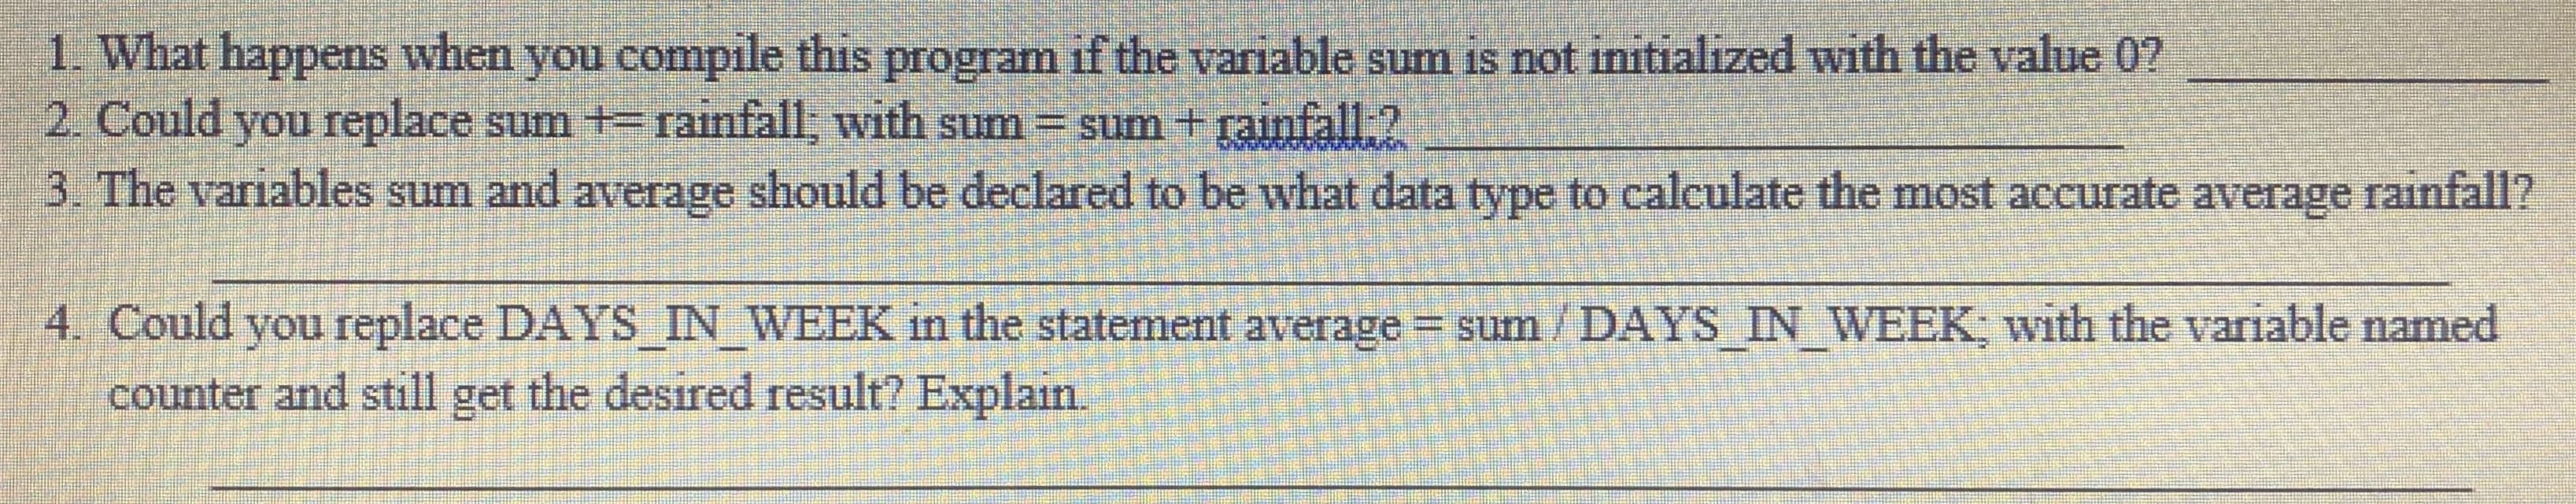 1. What happens when you compile this program if the variable sum is not initialized with the value 0?
2. Could you replace sum + rainfall, with sum= sum + rainfall-?
3. The variables sum and average should be declared to be what data type to calculate the most accurate average rainfall?
4. Could you replace DAYS_IN_WEEK in the statement average = sum/ DAYS IN WEEK; with the variable named
counter and still get the desired result? Explain.
